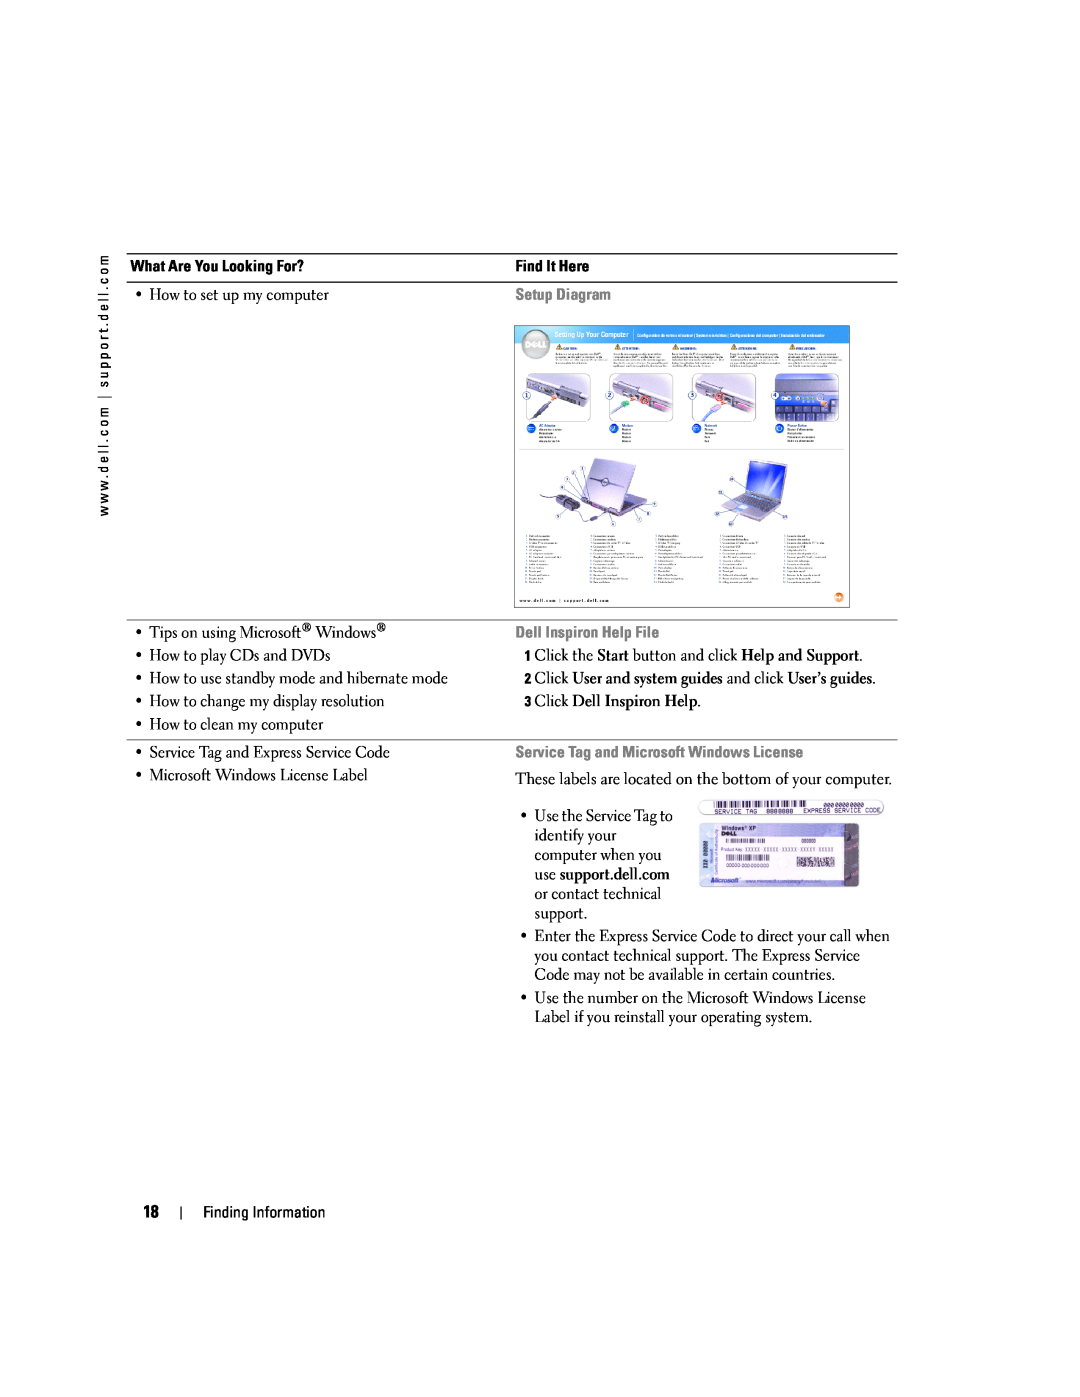 Dell PP09L owner manual Setup Diagram, Dell Inspiron Help File, Service Tag and Microsoft Windows License 